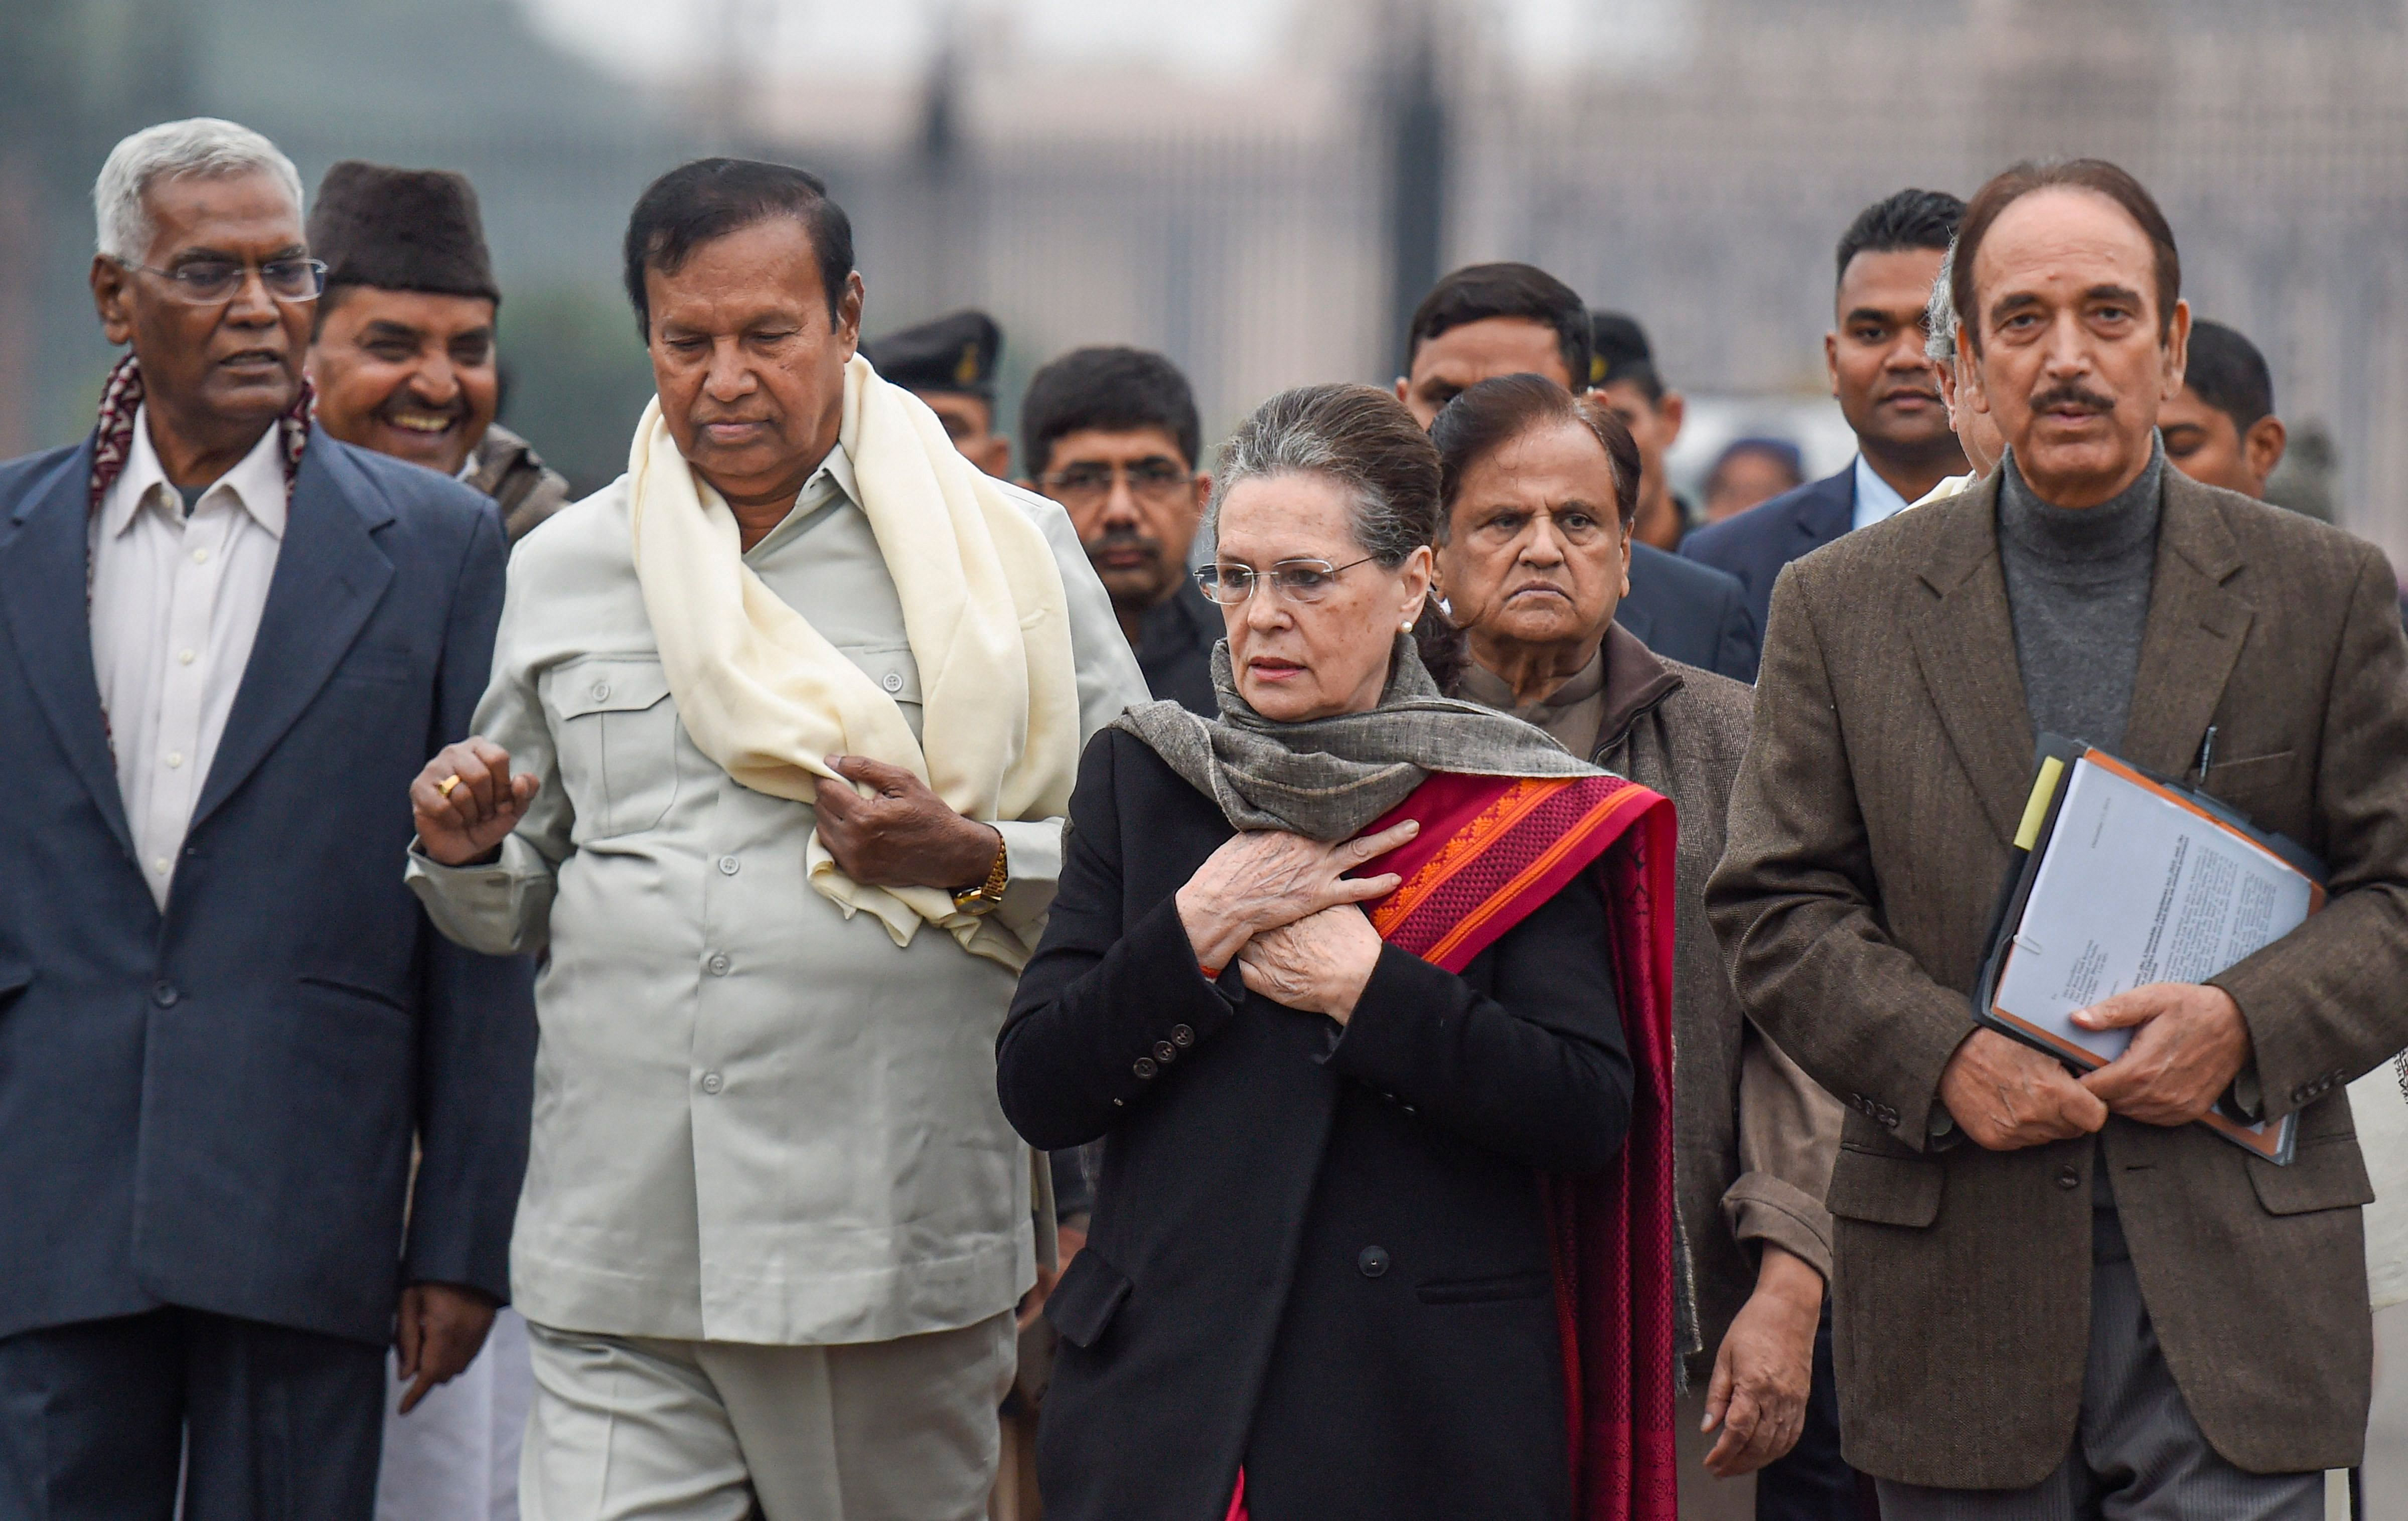 Congress interim president Sonia Gandhi along with party leader Ghulam Nabi Azad, DMK's TR Baalu and other opposition leaders after meeting President Ram Nath Kovind to register their protest over the police action on students of Jamia Millia Islamia and Aligarh Muslim University and repeal the Citizenship Amendment Act, at the Rashtrapati Bhavan in New Delhi. (PTI Photo)